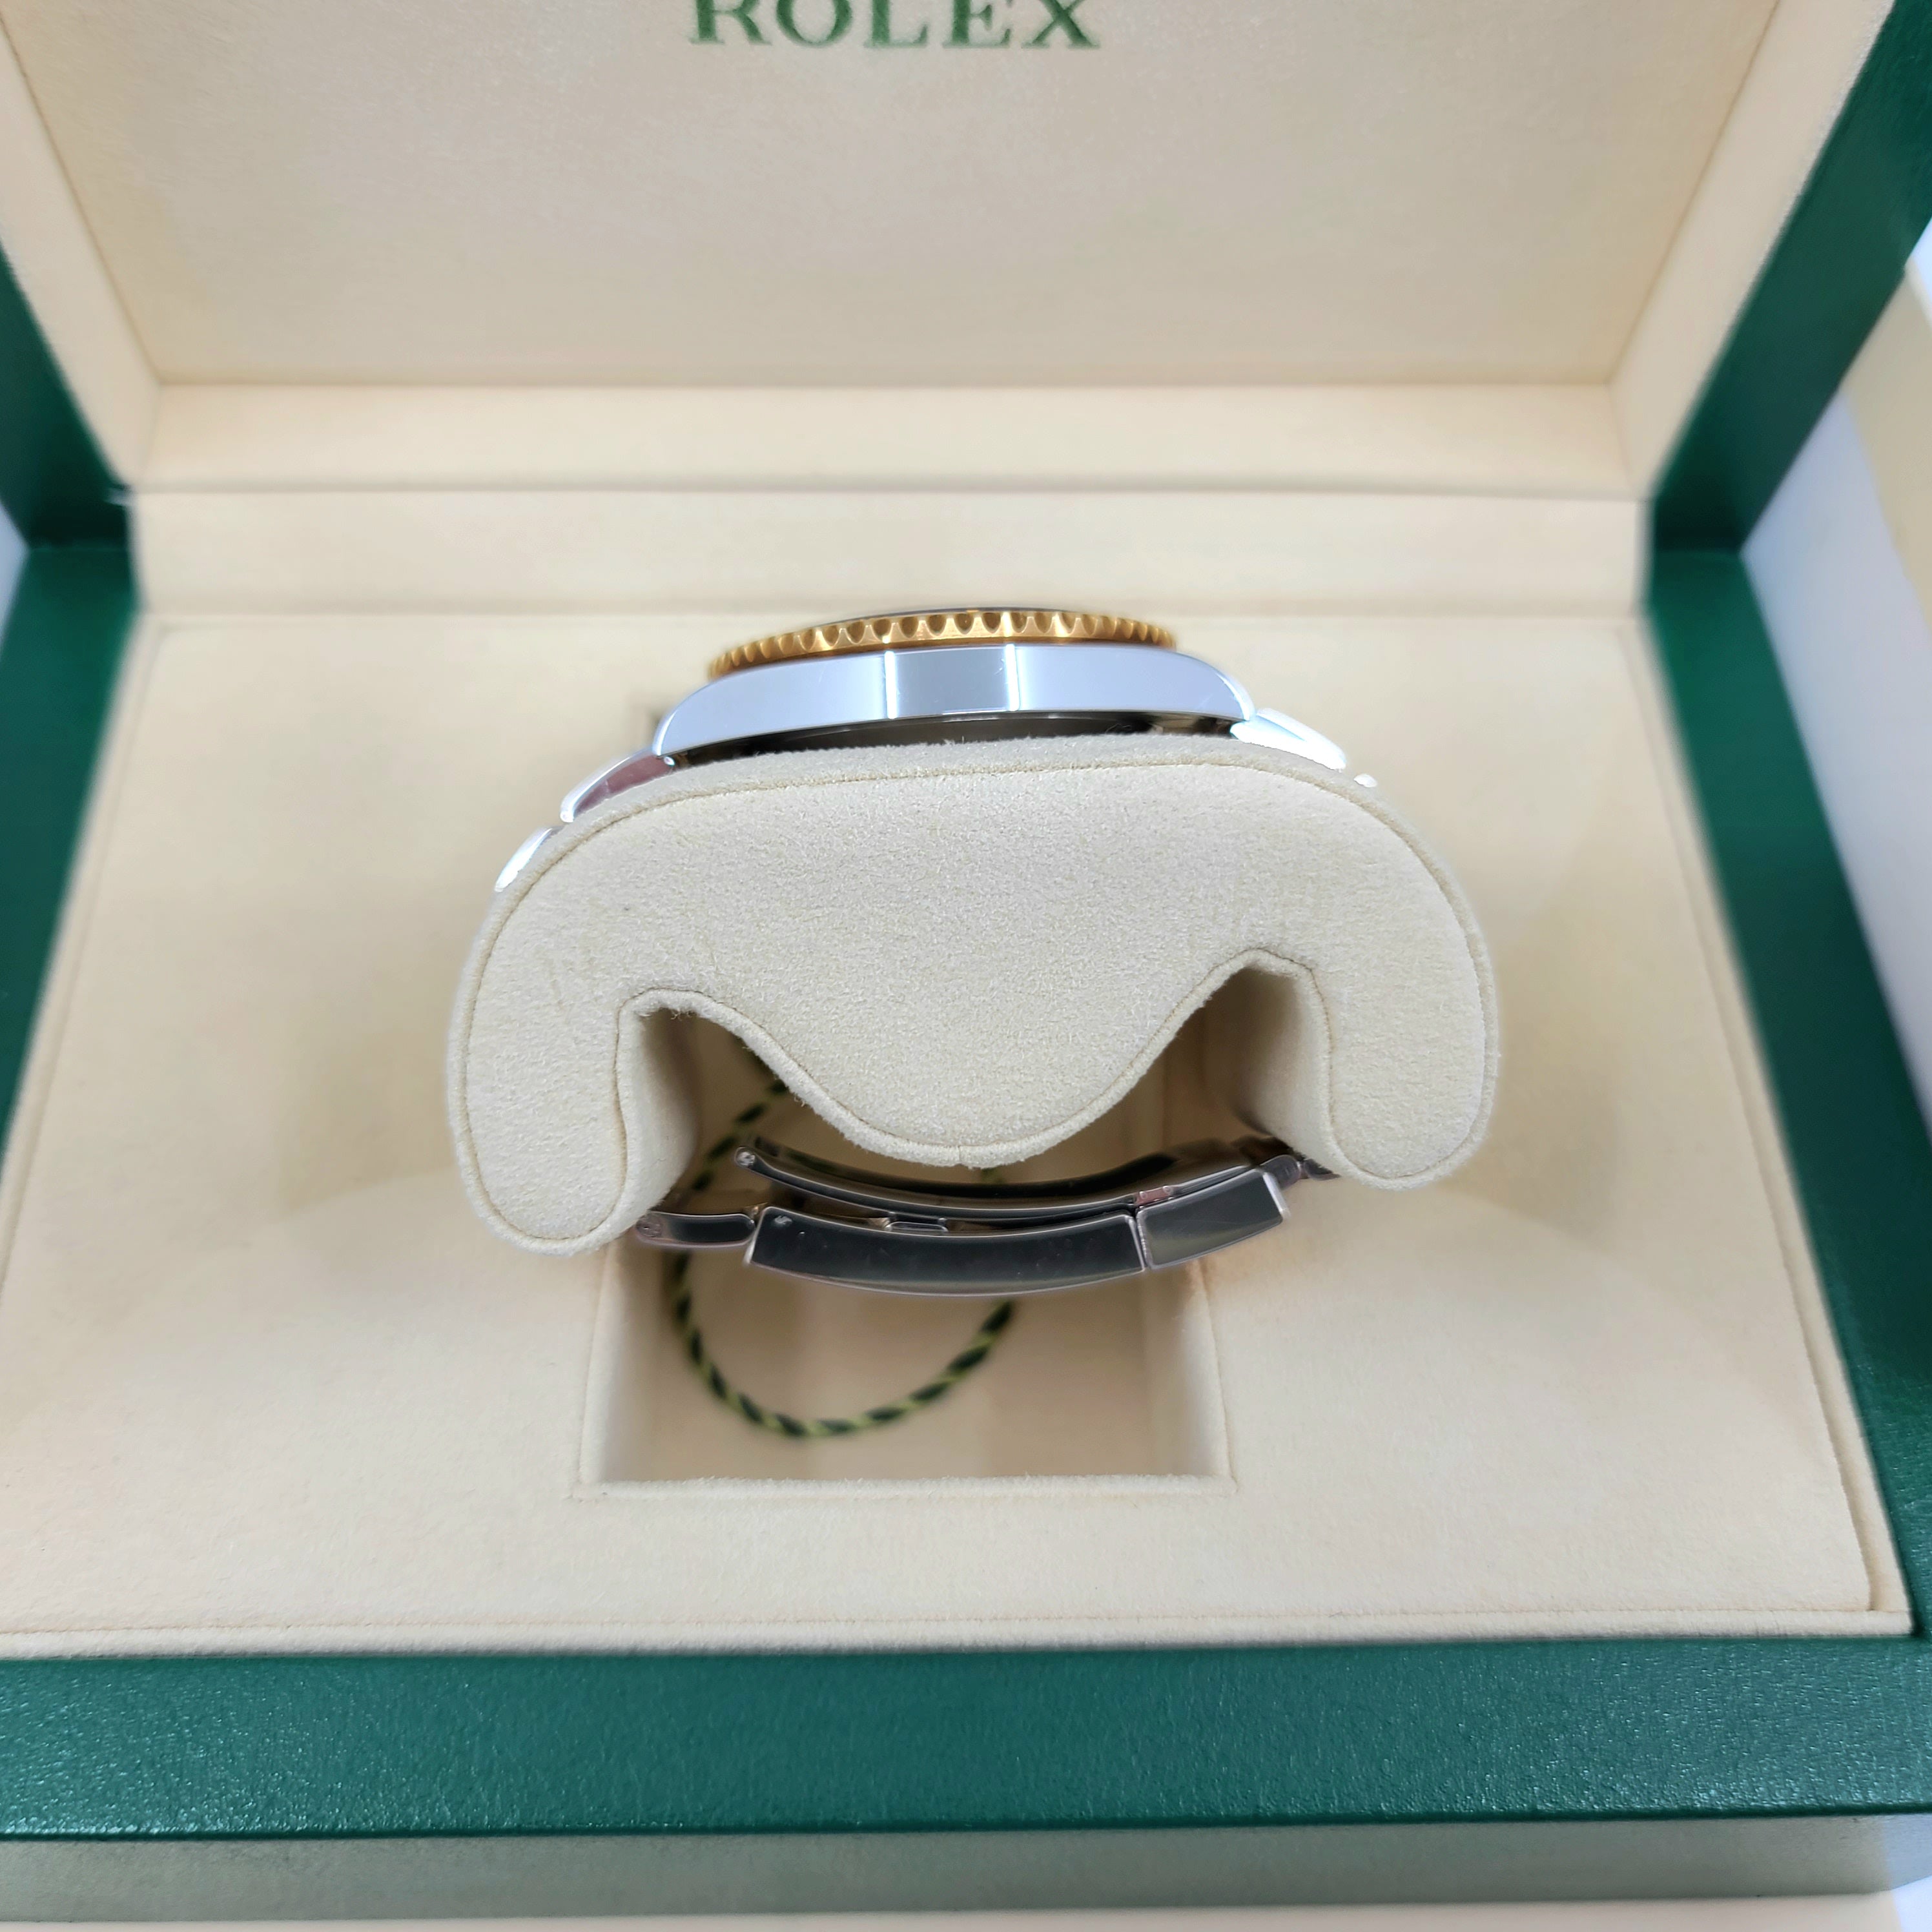 Rolex Oyster Perpetual Submariner Date 18K Yellow Gold & Stainless Steel Men's Watch, Preowned- 116613LB Rolex